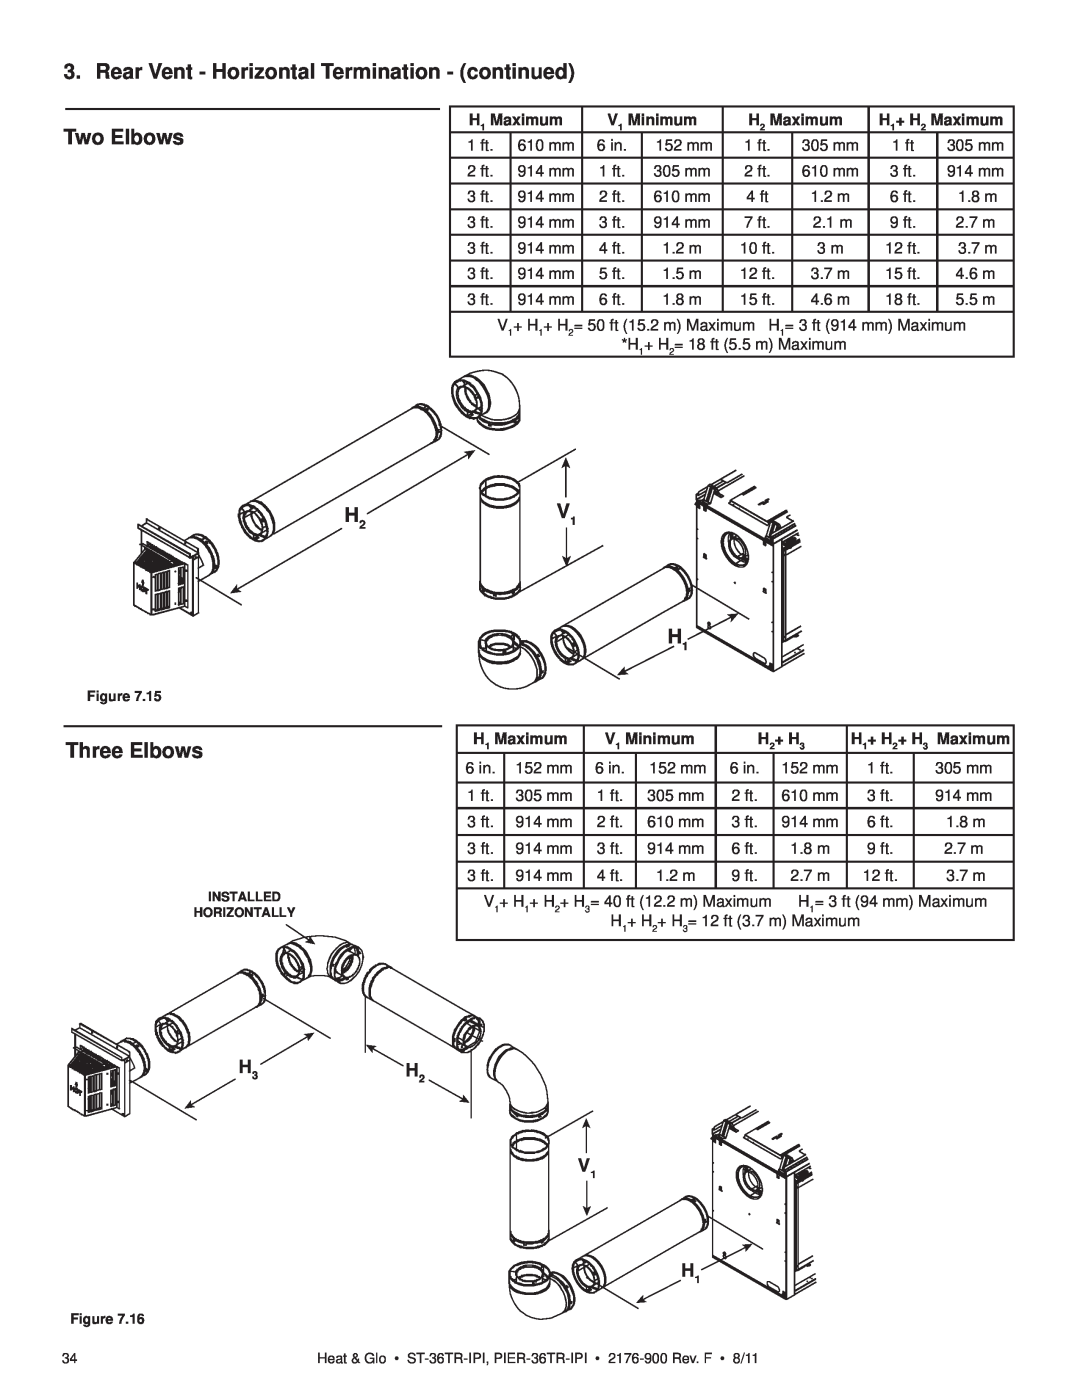 Heat & Glo LifeStyle ST-36TRLP-IPI Rear Vent - Horizontal Termination - continued, Two Elbows, Three Elbows, V1 H1, H 2+ H 